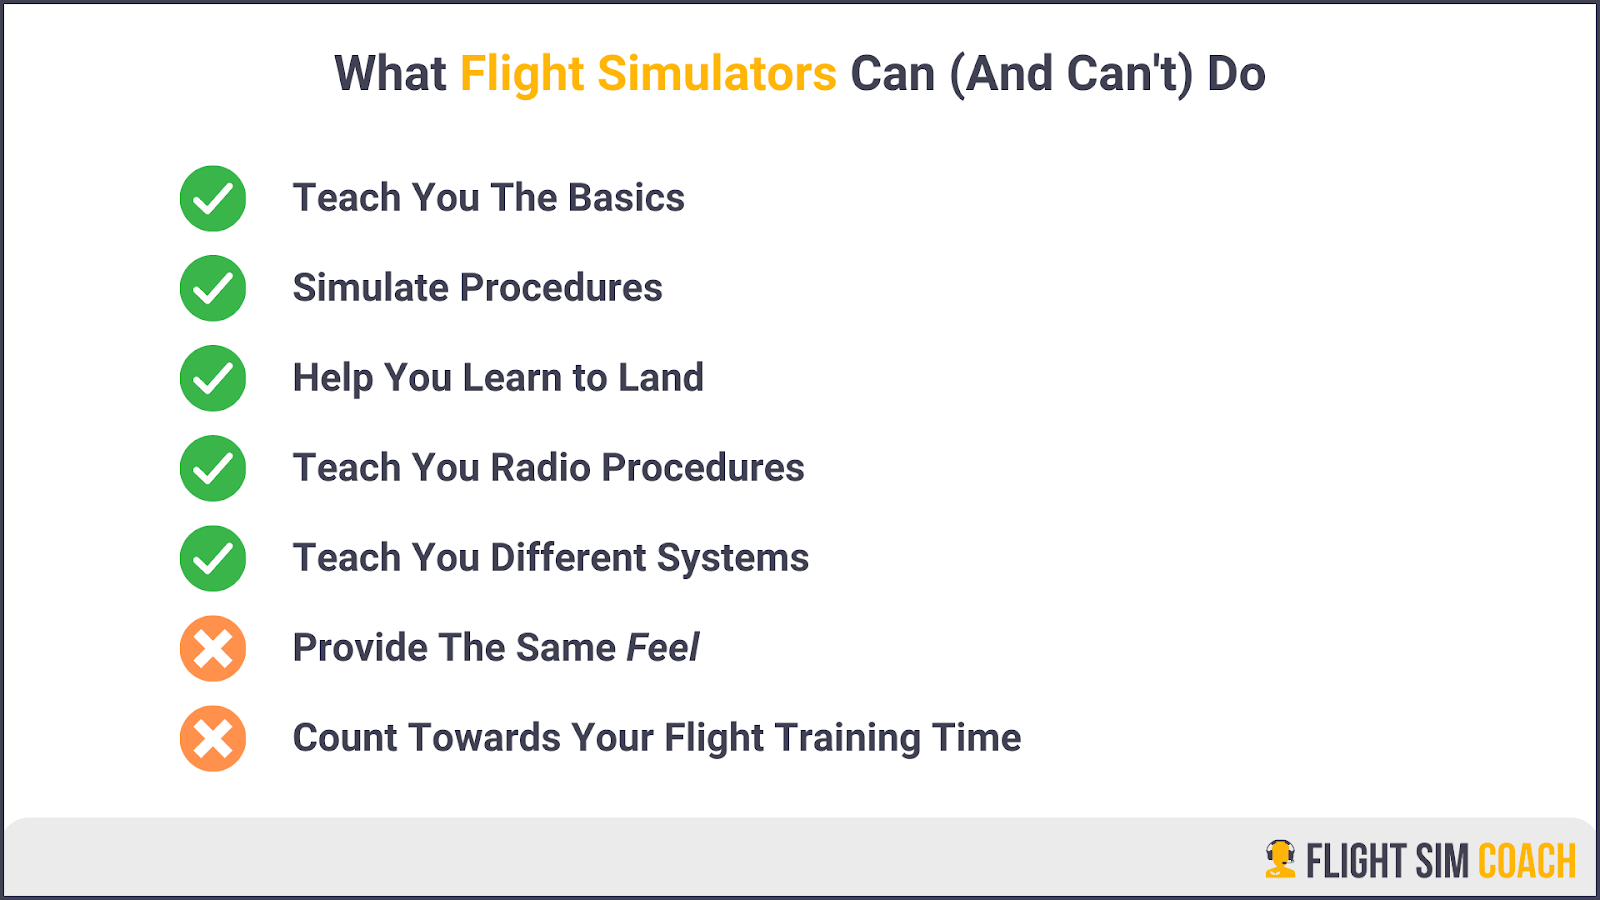 Can You Learn to Fly Using a Flight Simulator?